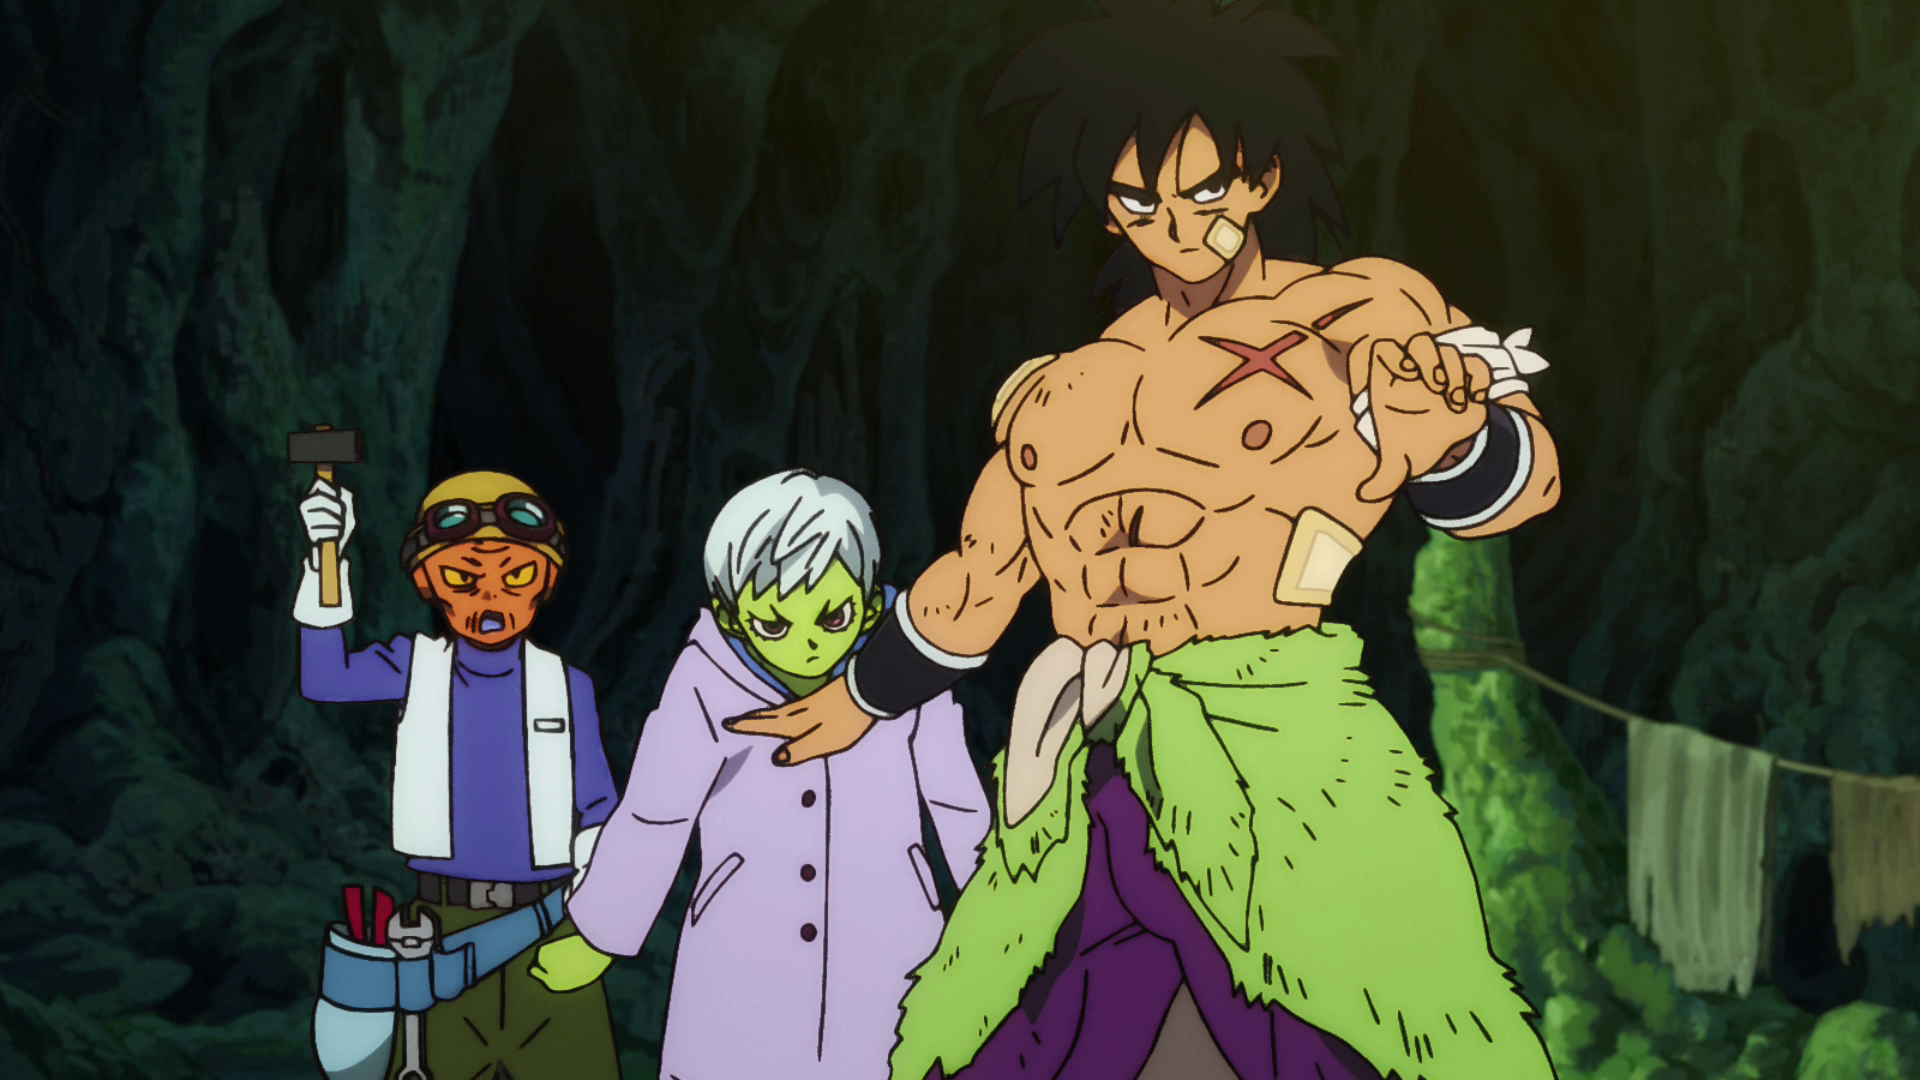 Broly (Vic Mignogna) stands ready to protect Cheelai (Erica Lindbeck) and Lemo (Bruce Carey) in Dragon Ball Super: Broly (2018), Toei Animation via Blu-ray